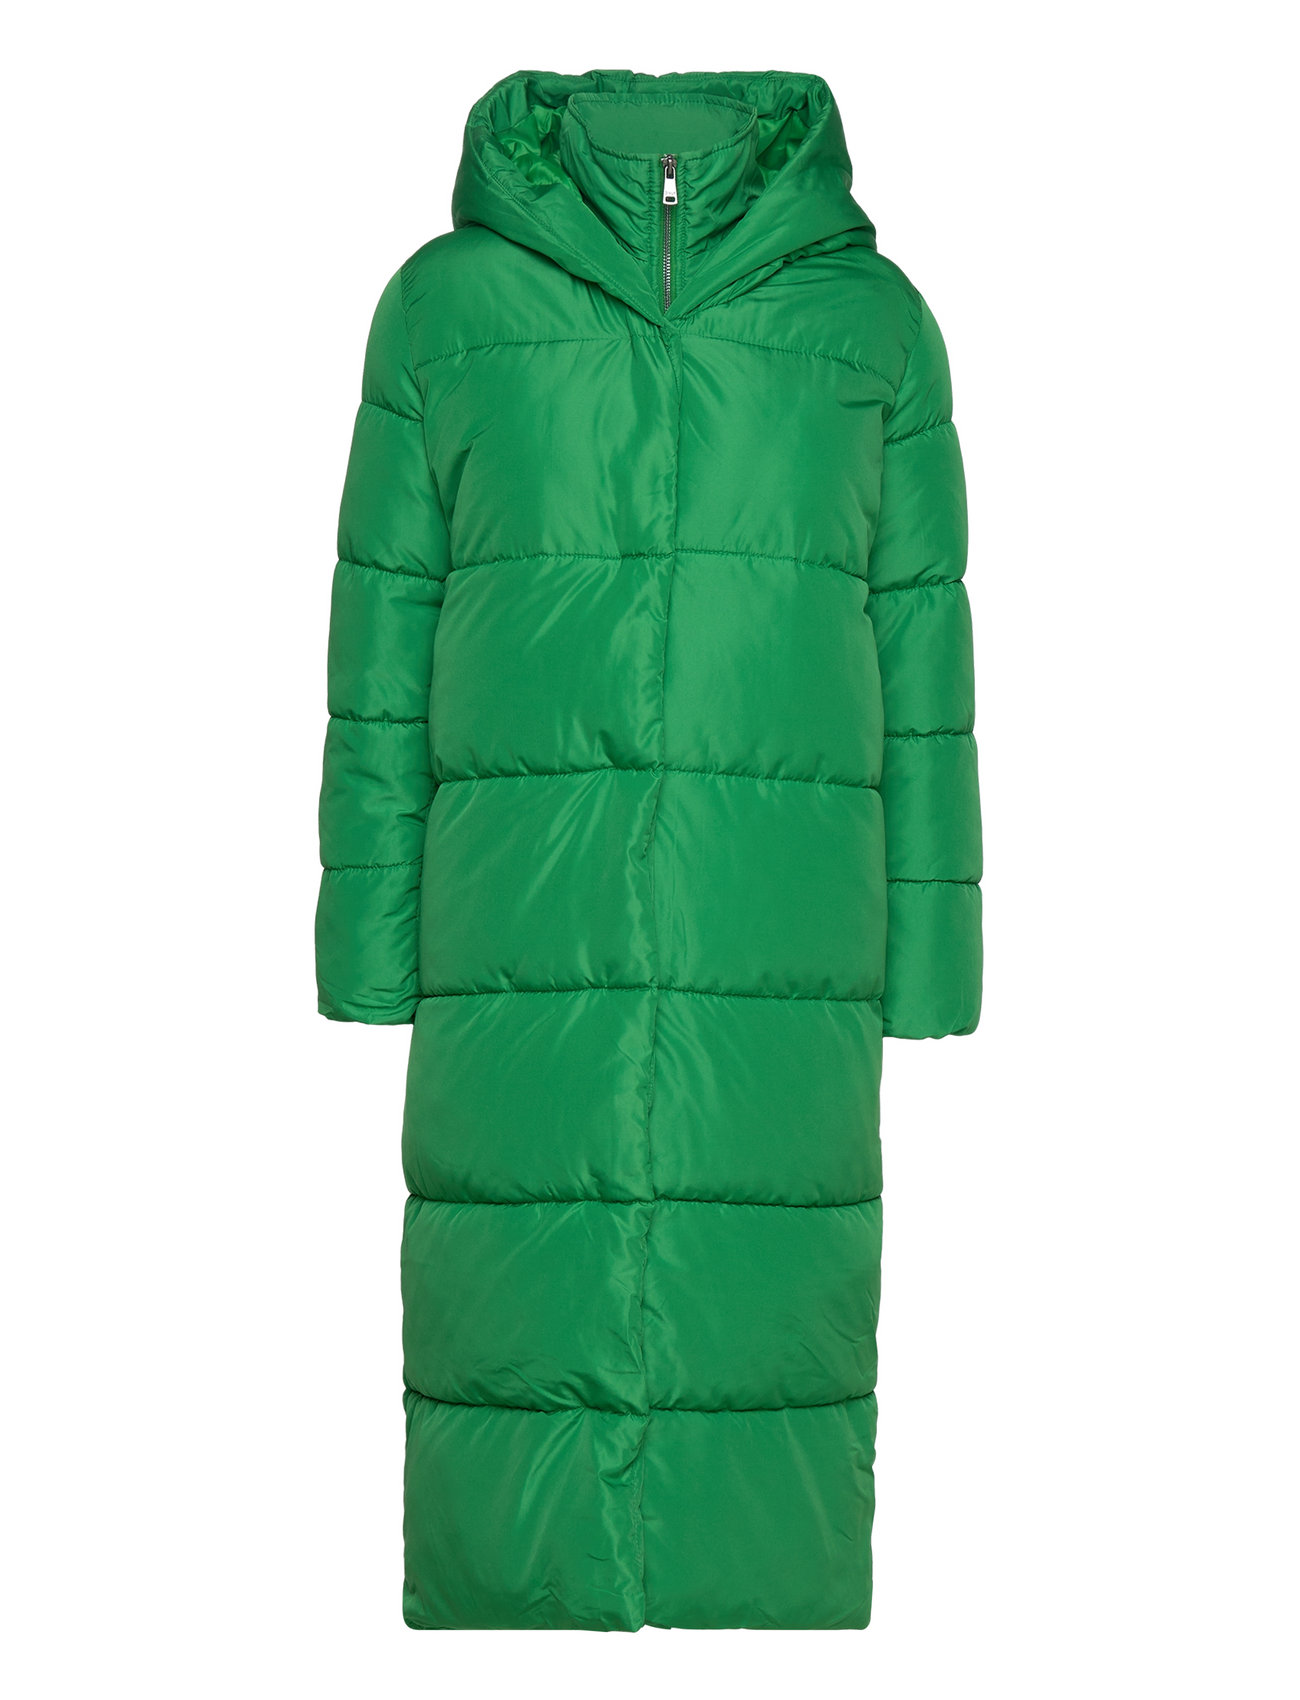 ONLY Onlamy X Long Puffer Coat Otw - 89.99 €. Buy Padded Coats from ONLY  online at Boozt.com. Fast delivery and easy returns